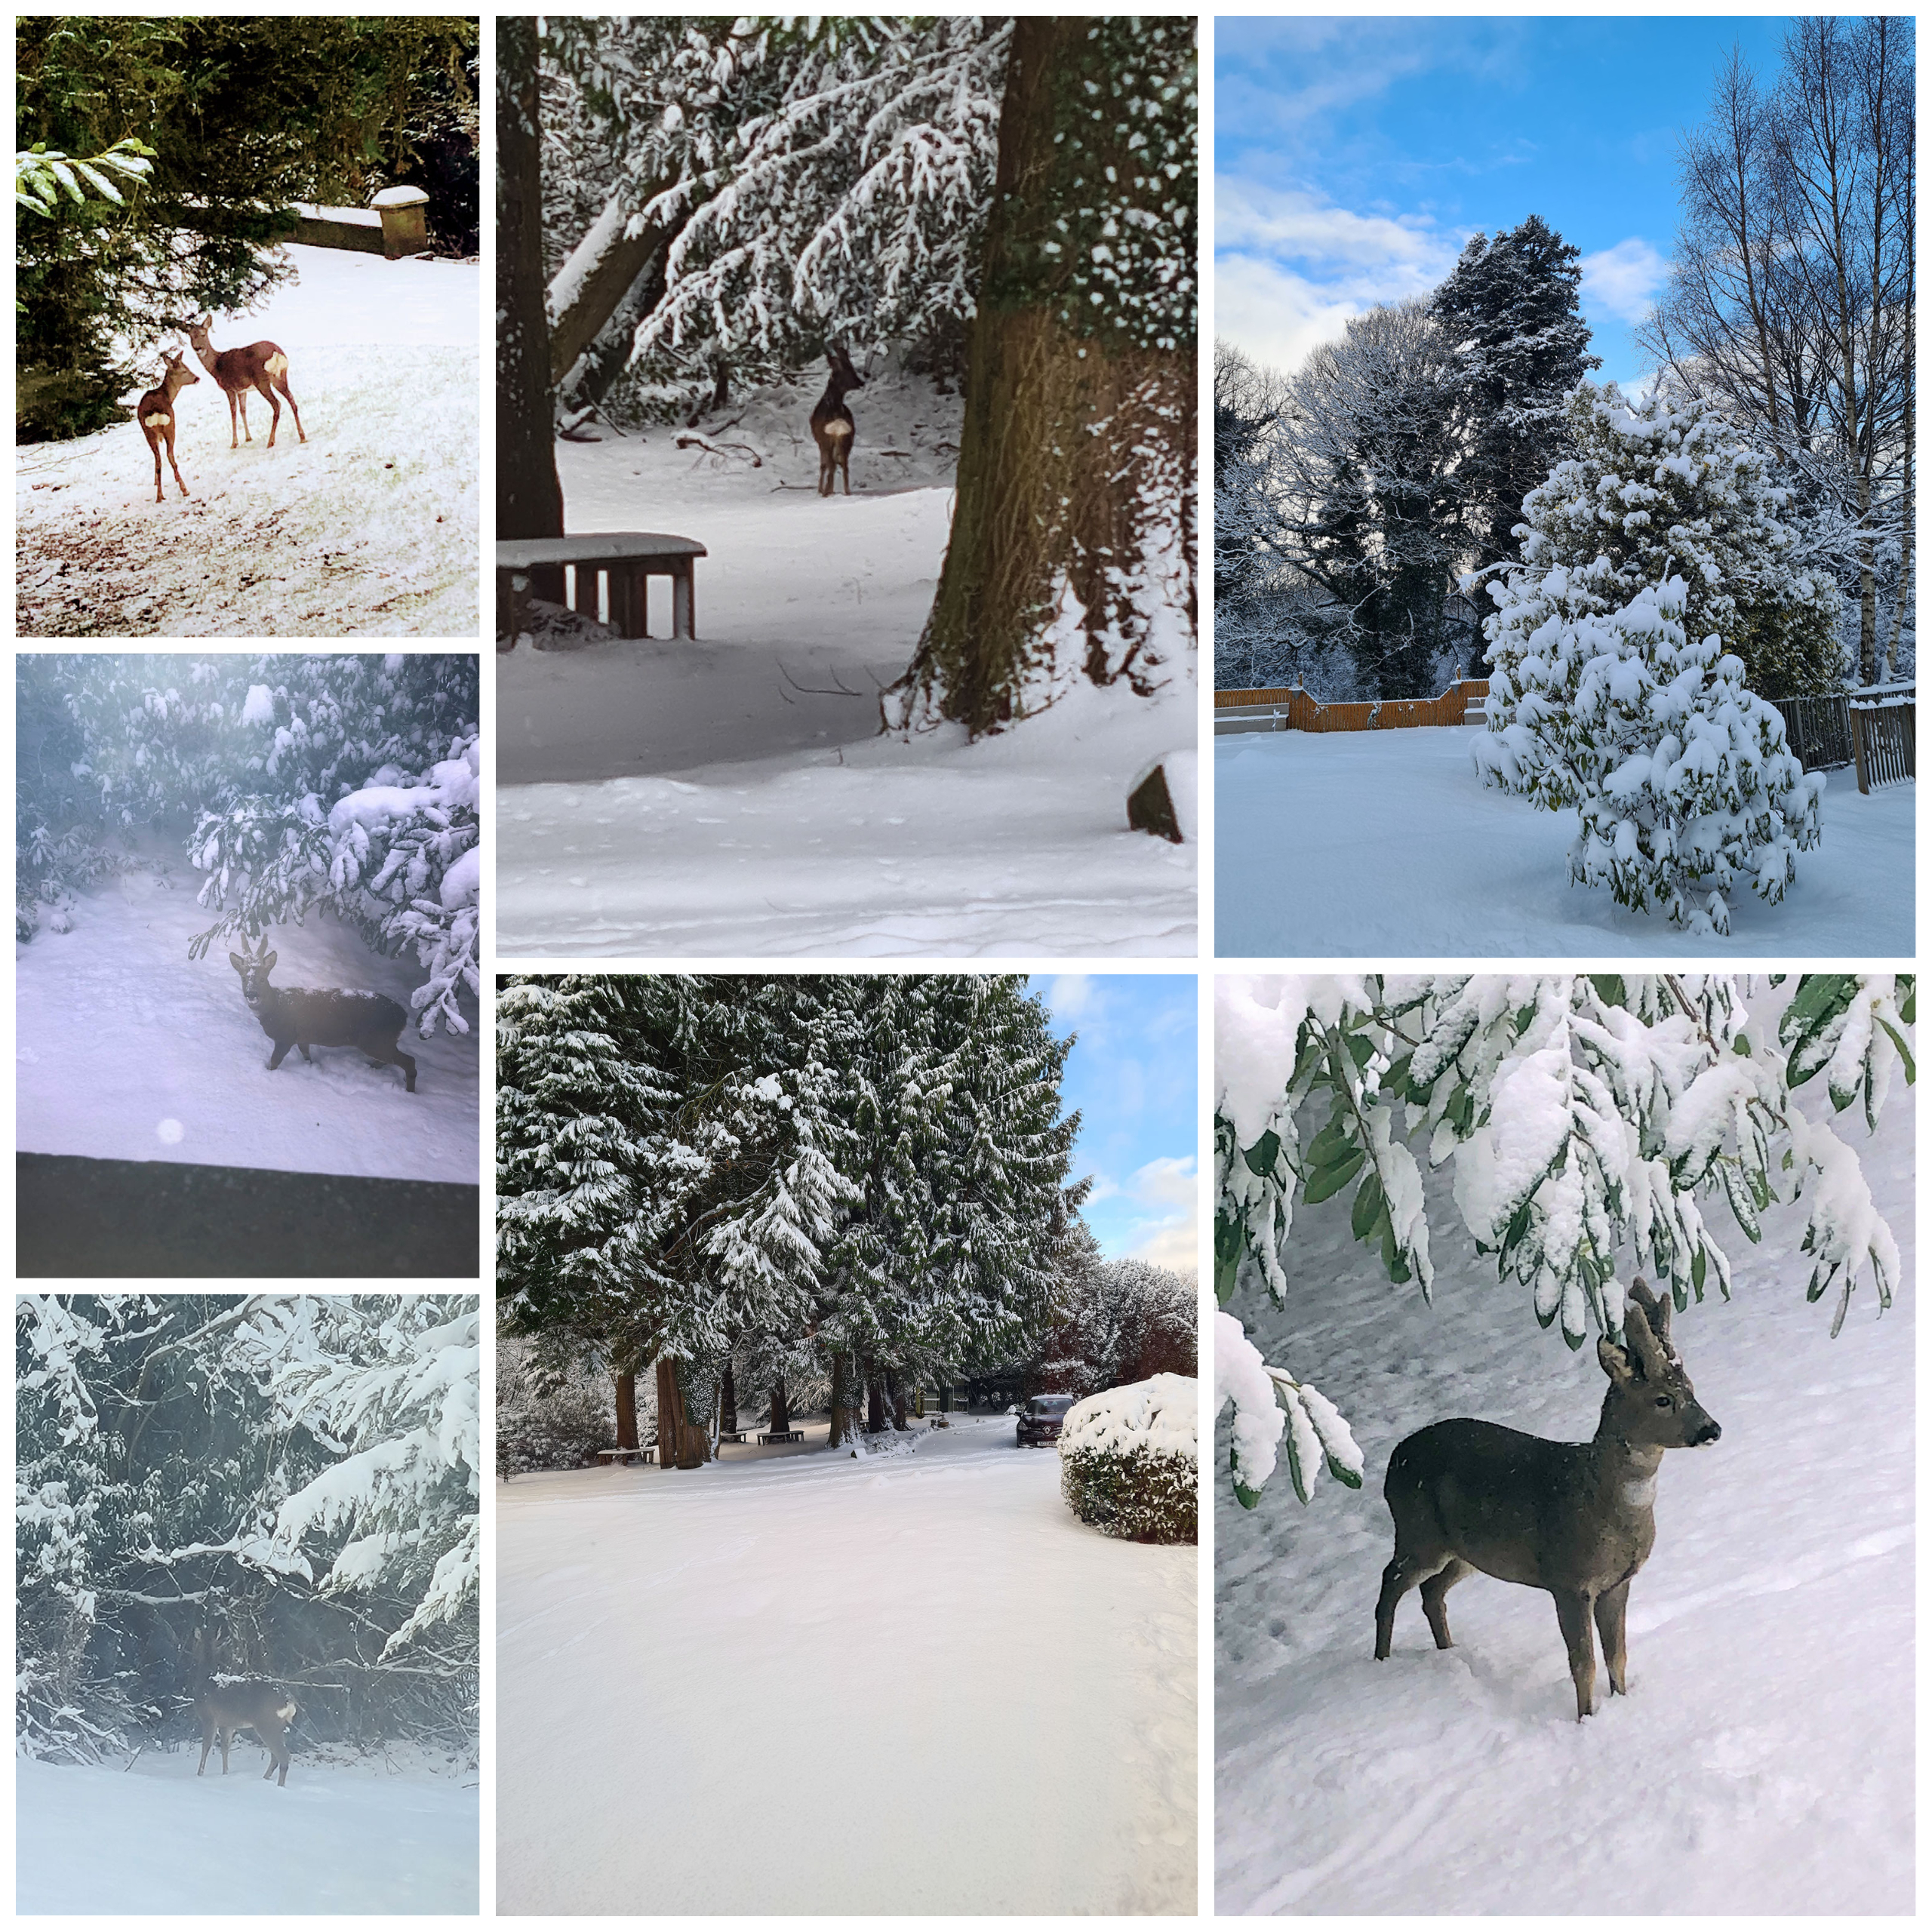 Wallside Grange Care Home's visiting herd of deer playing in the snow in the home's grounds.